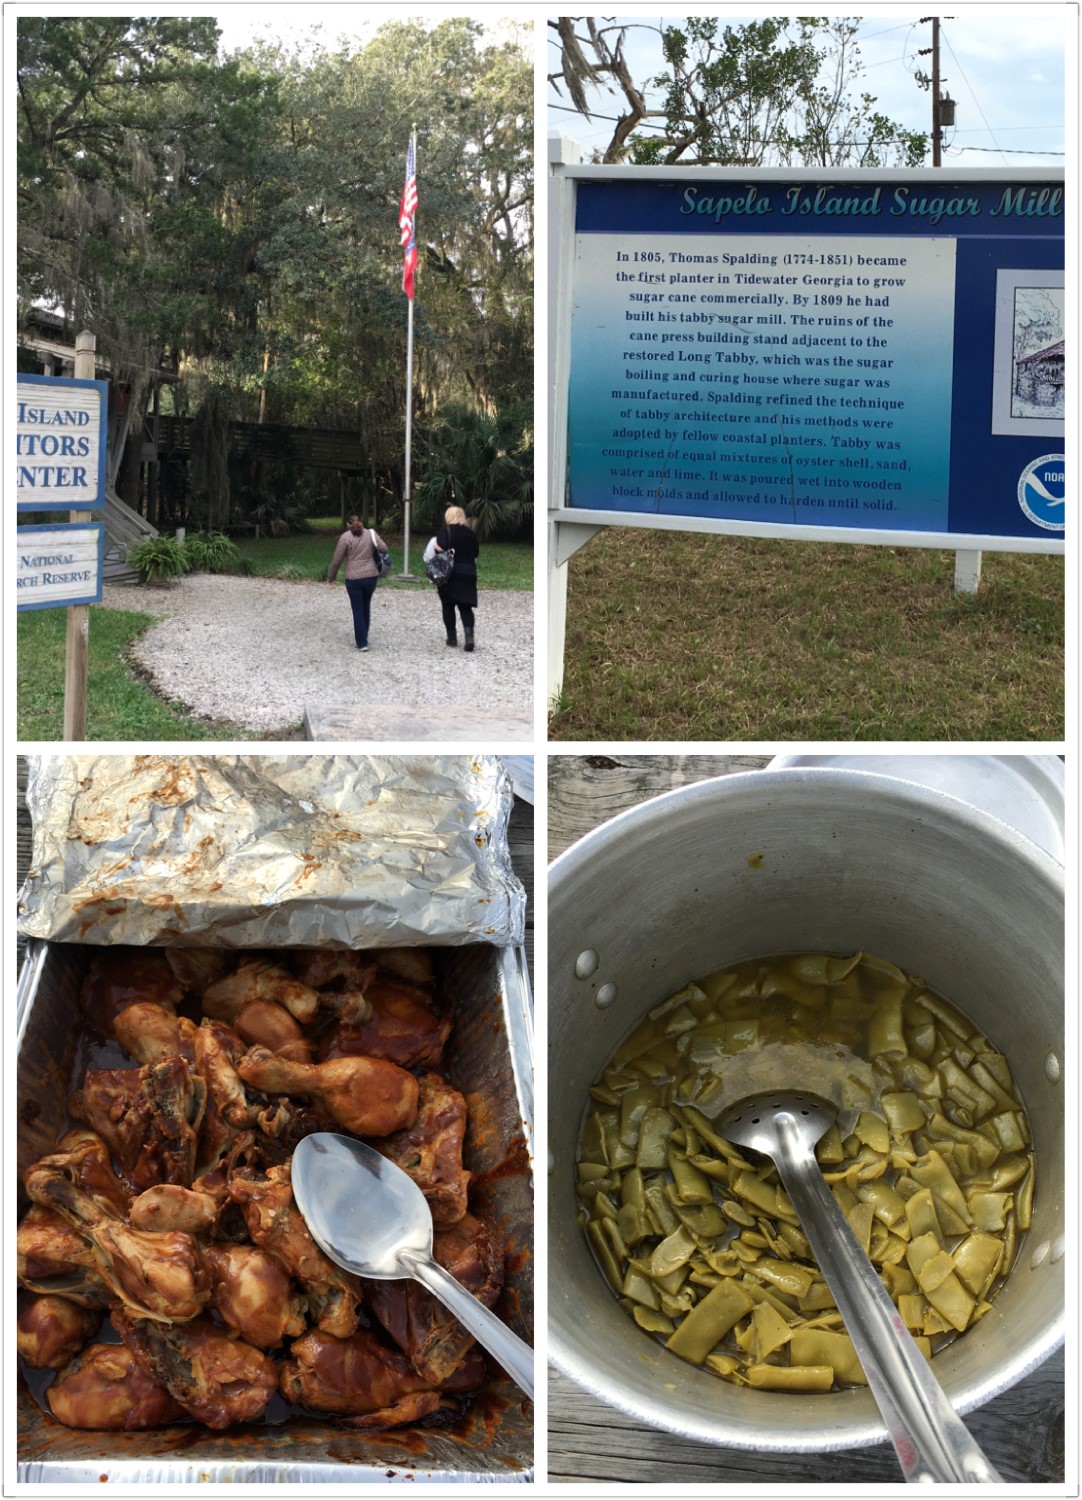 Snapshots from the visit to Sapelo Island.